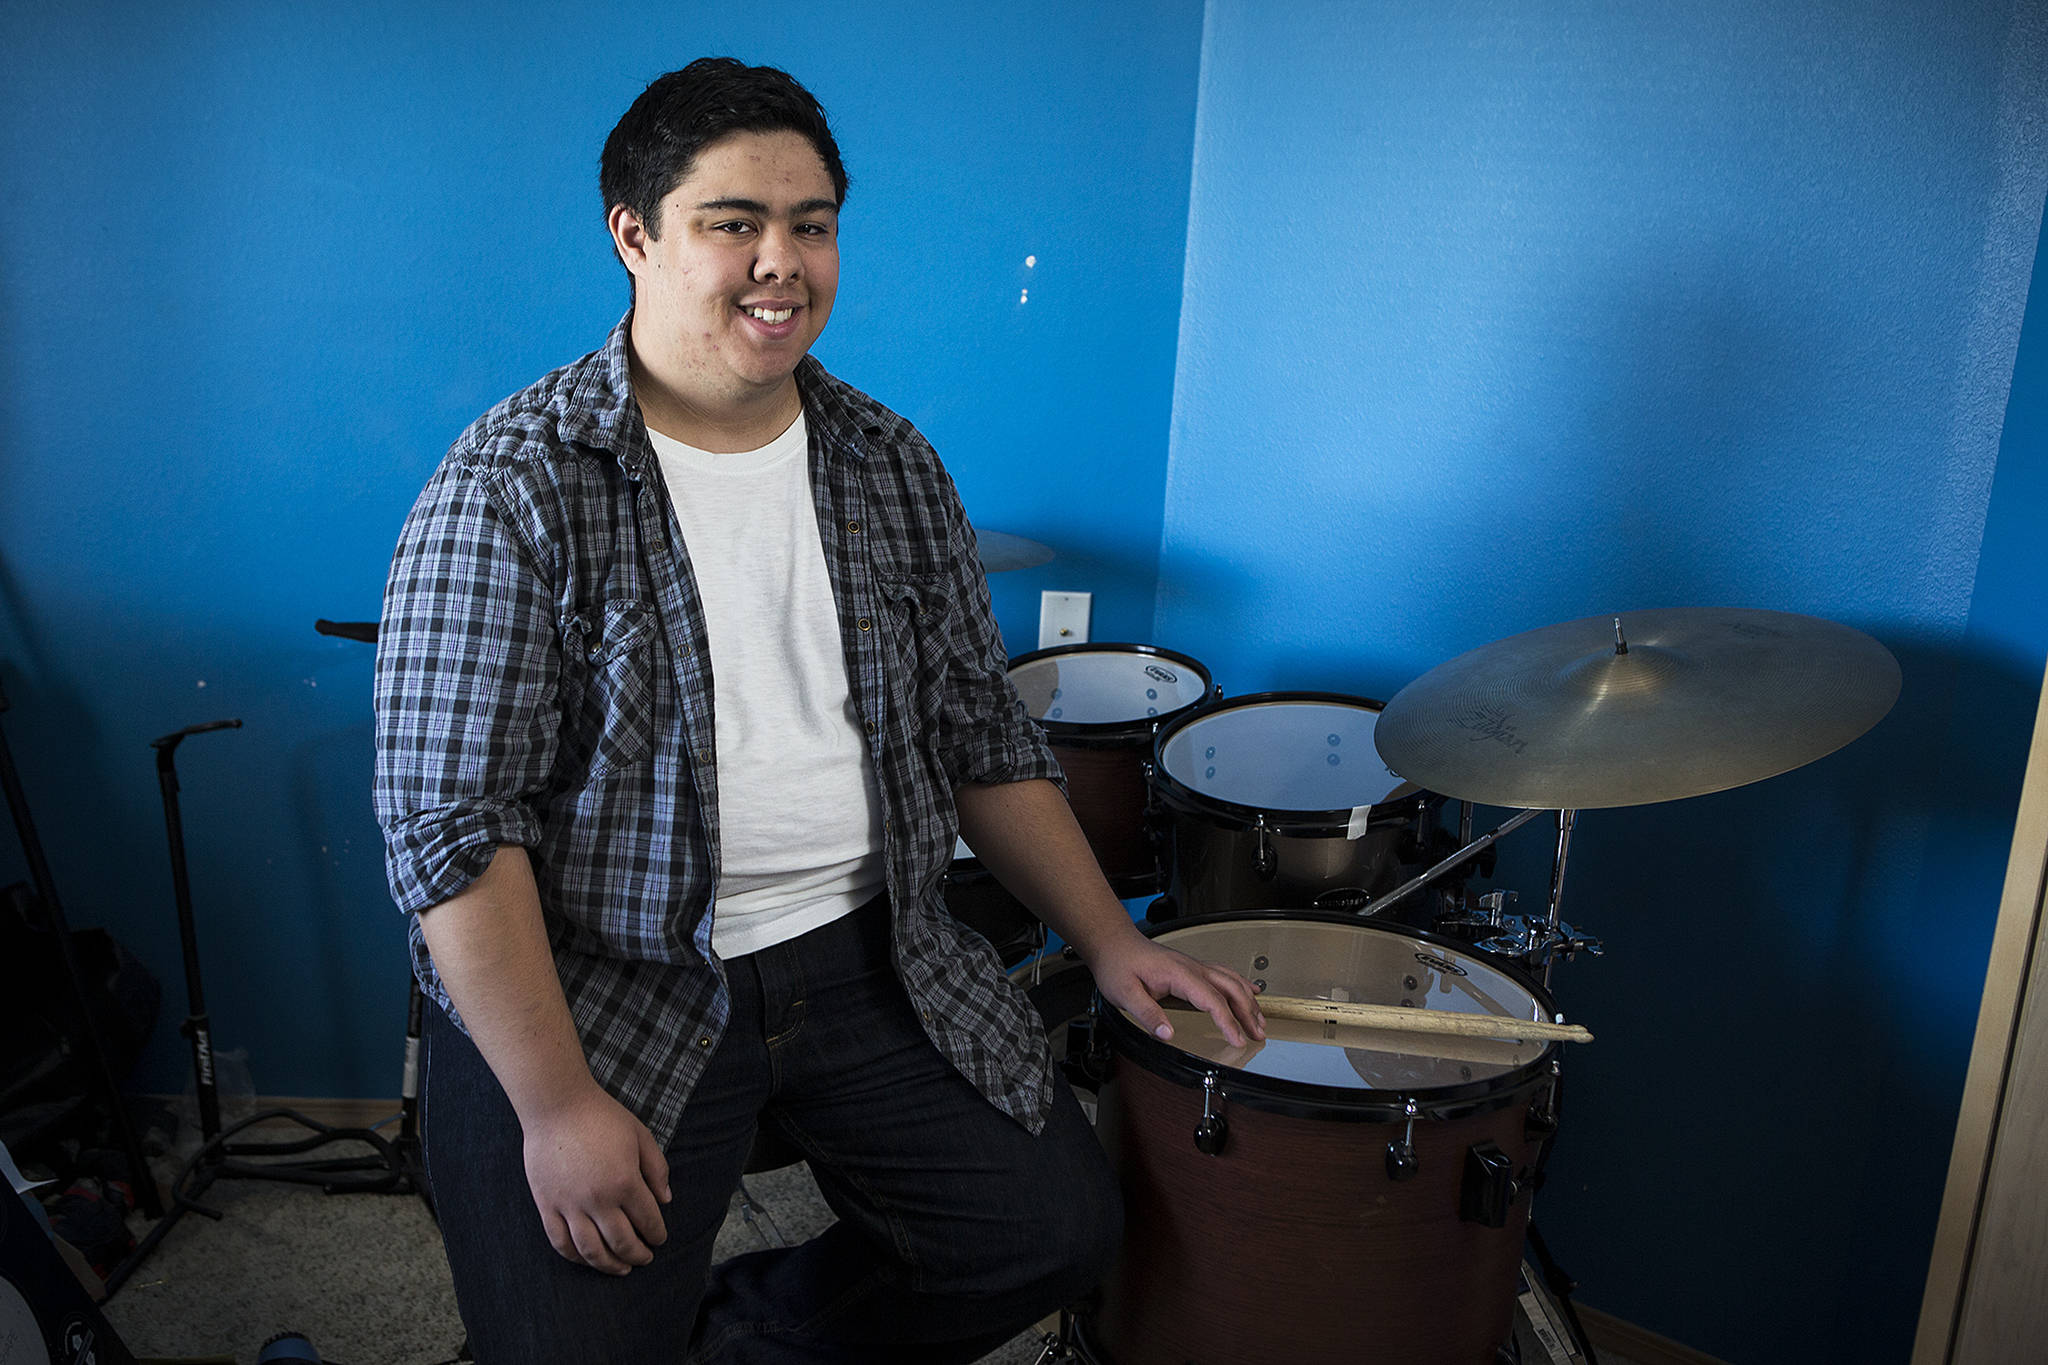 Loren Anderson is a musician and valedictorian from Marysville Pilchuck High School. He plans on attending Gonzaga University this fall. (Ian Terry / The Herald)